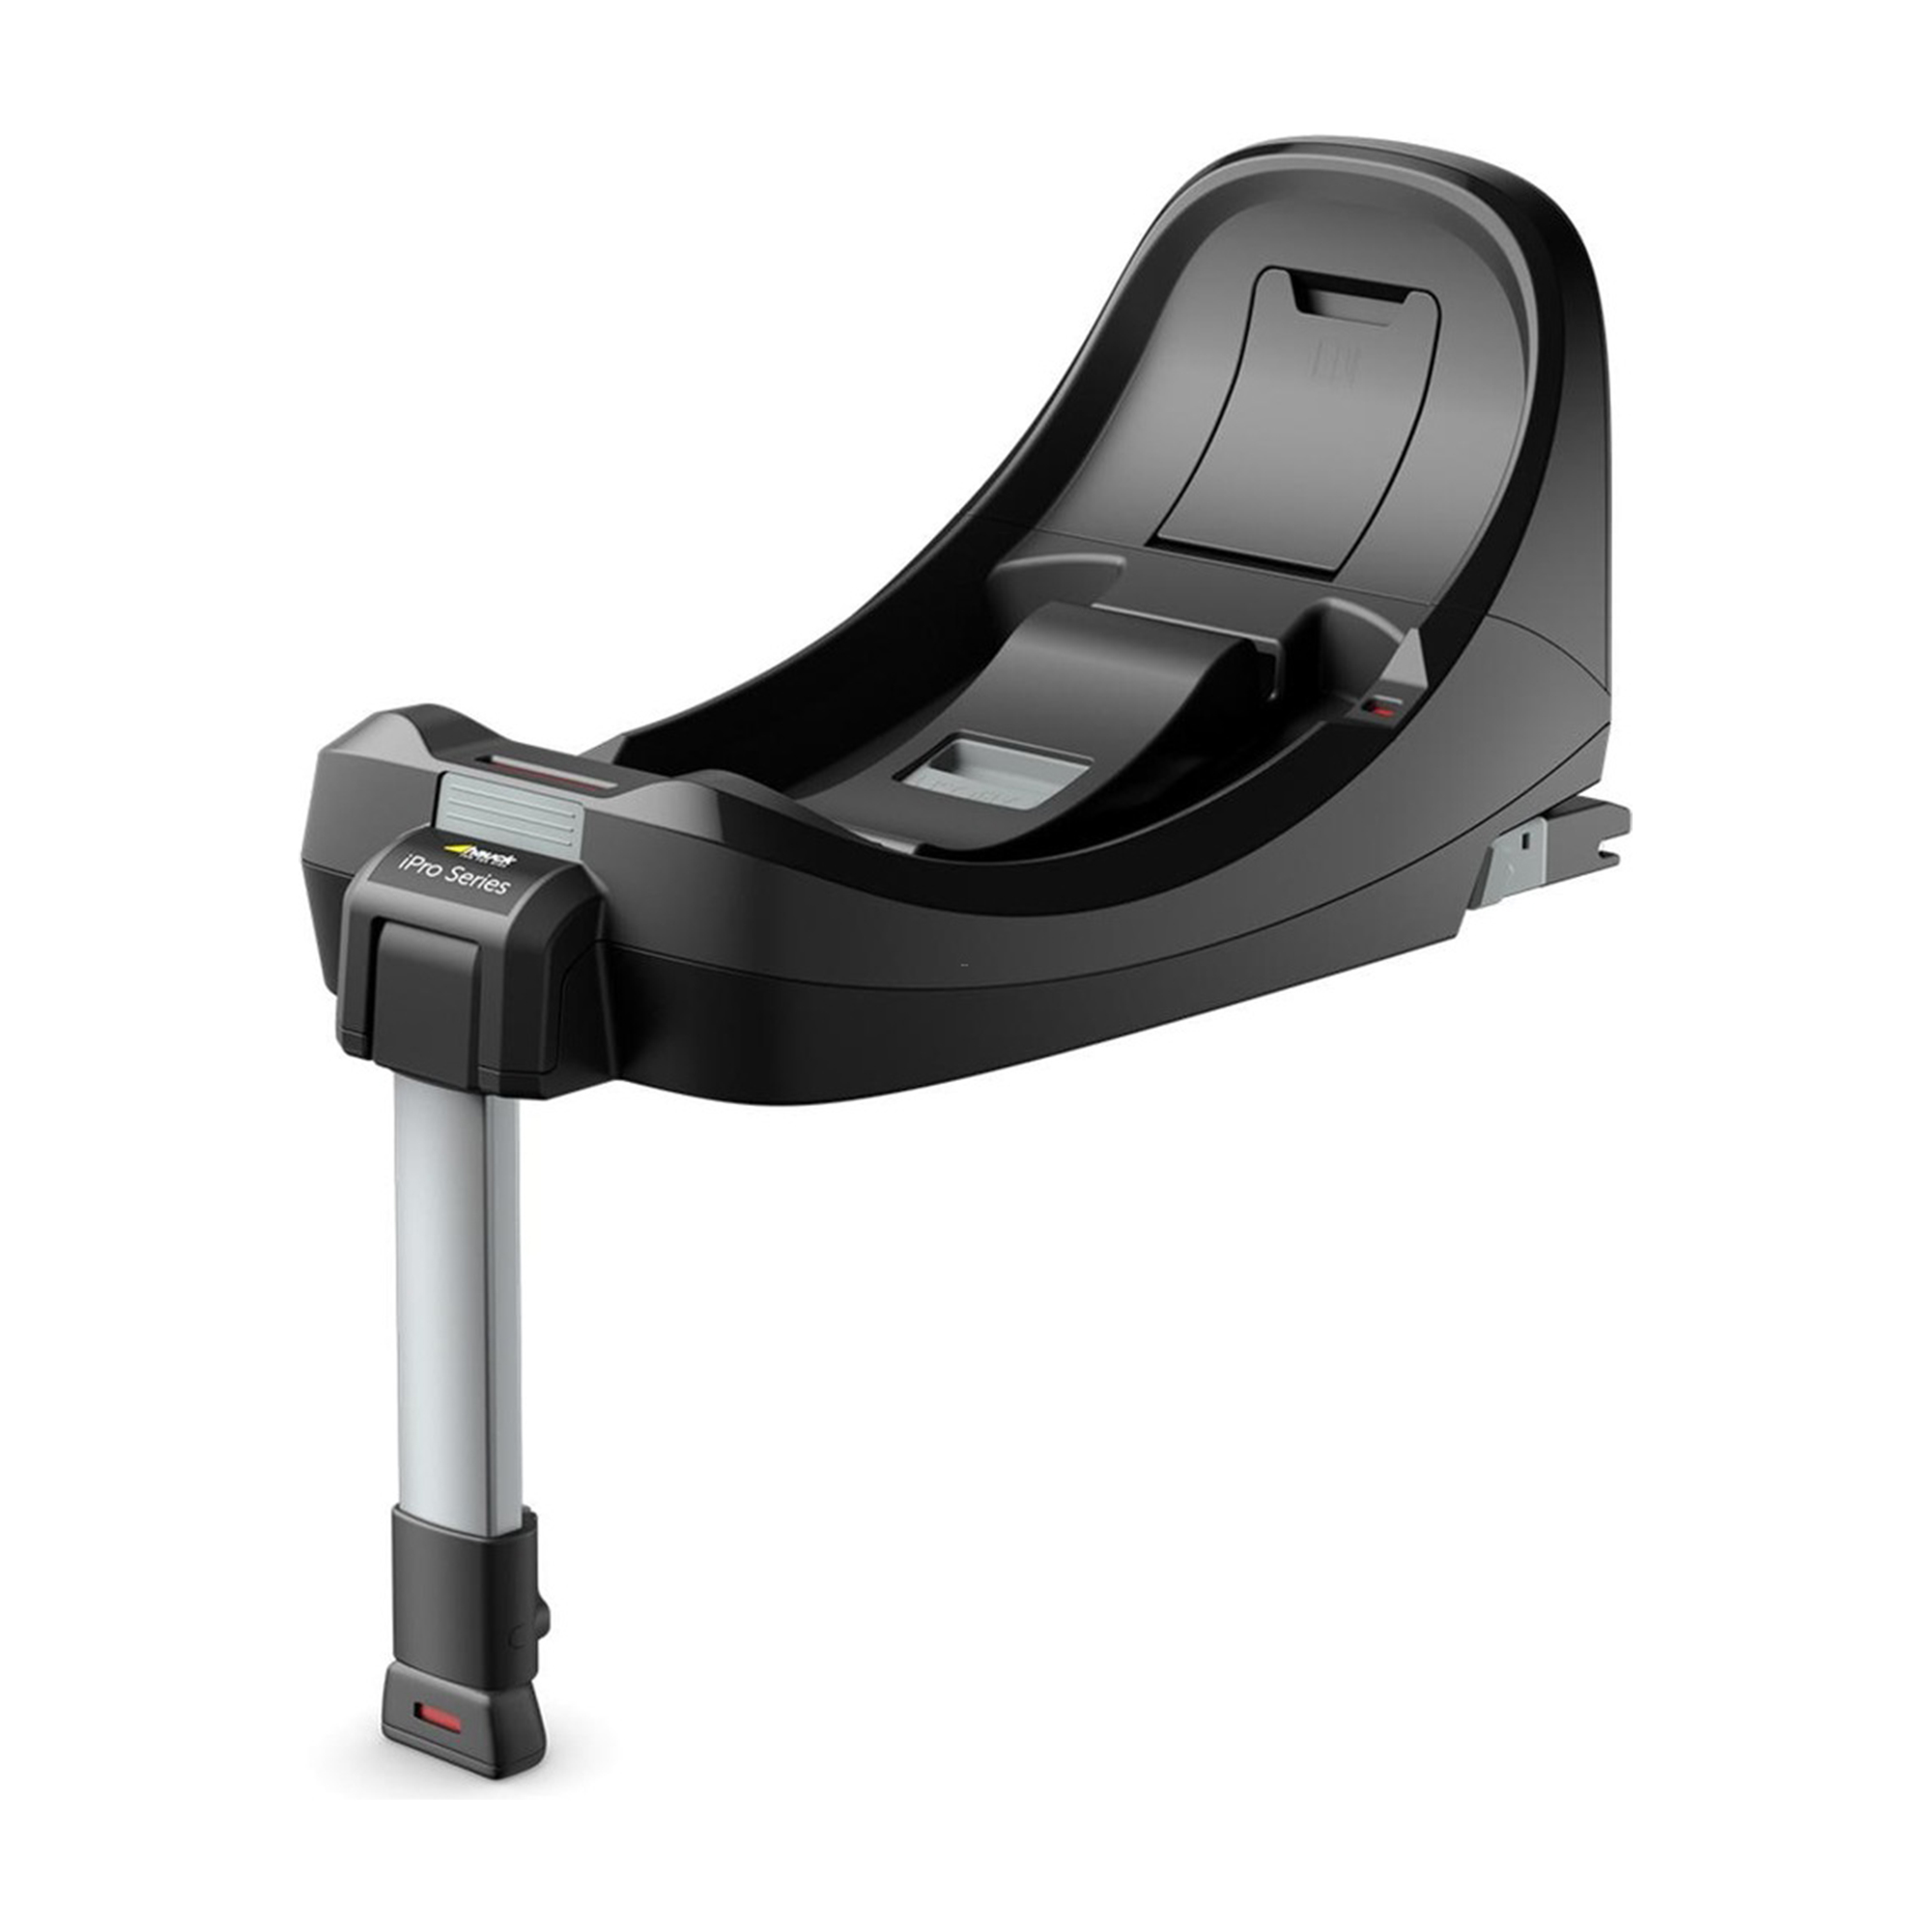 Hauck iPro Isofix Base - Black compatible with Hauck iPro baby and iPro  kids series car seat